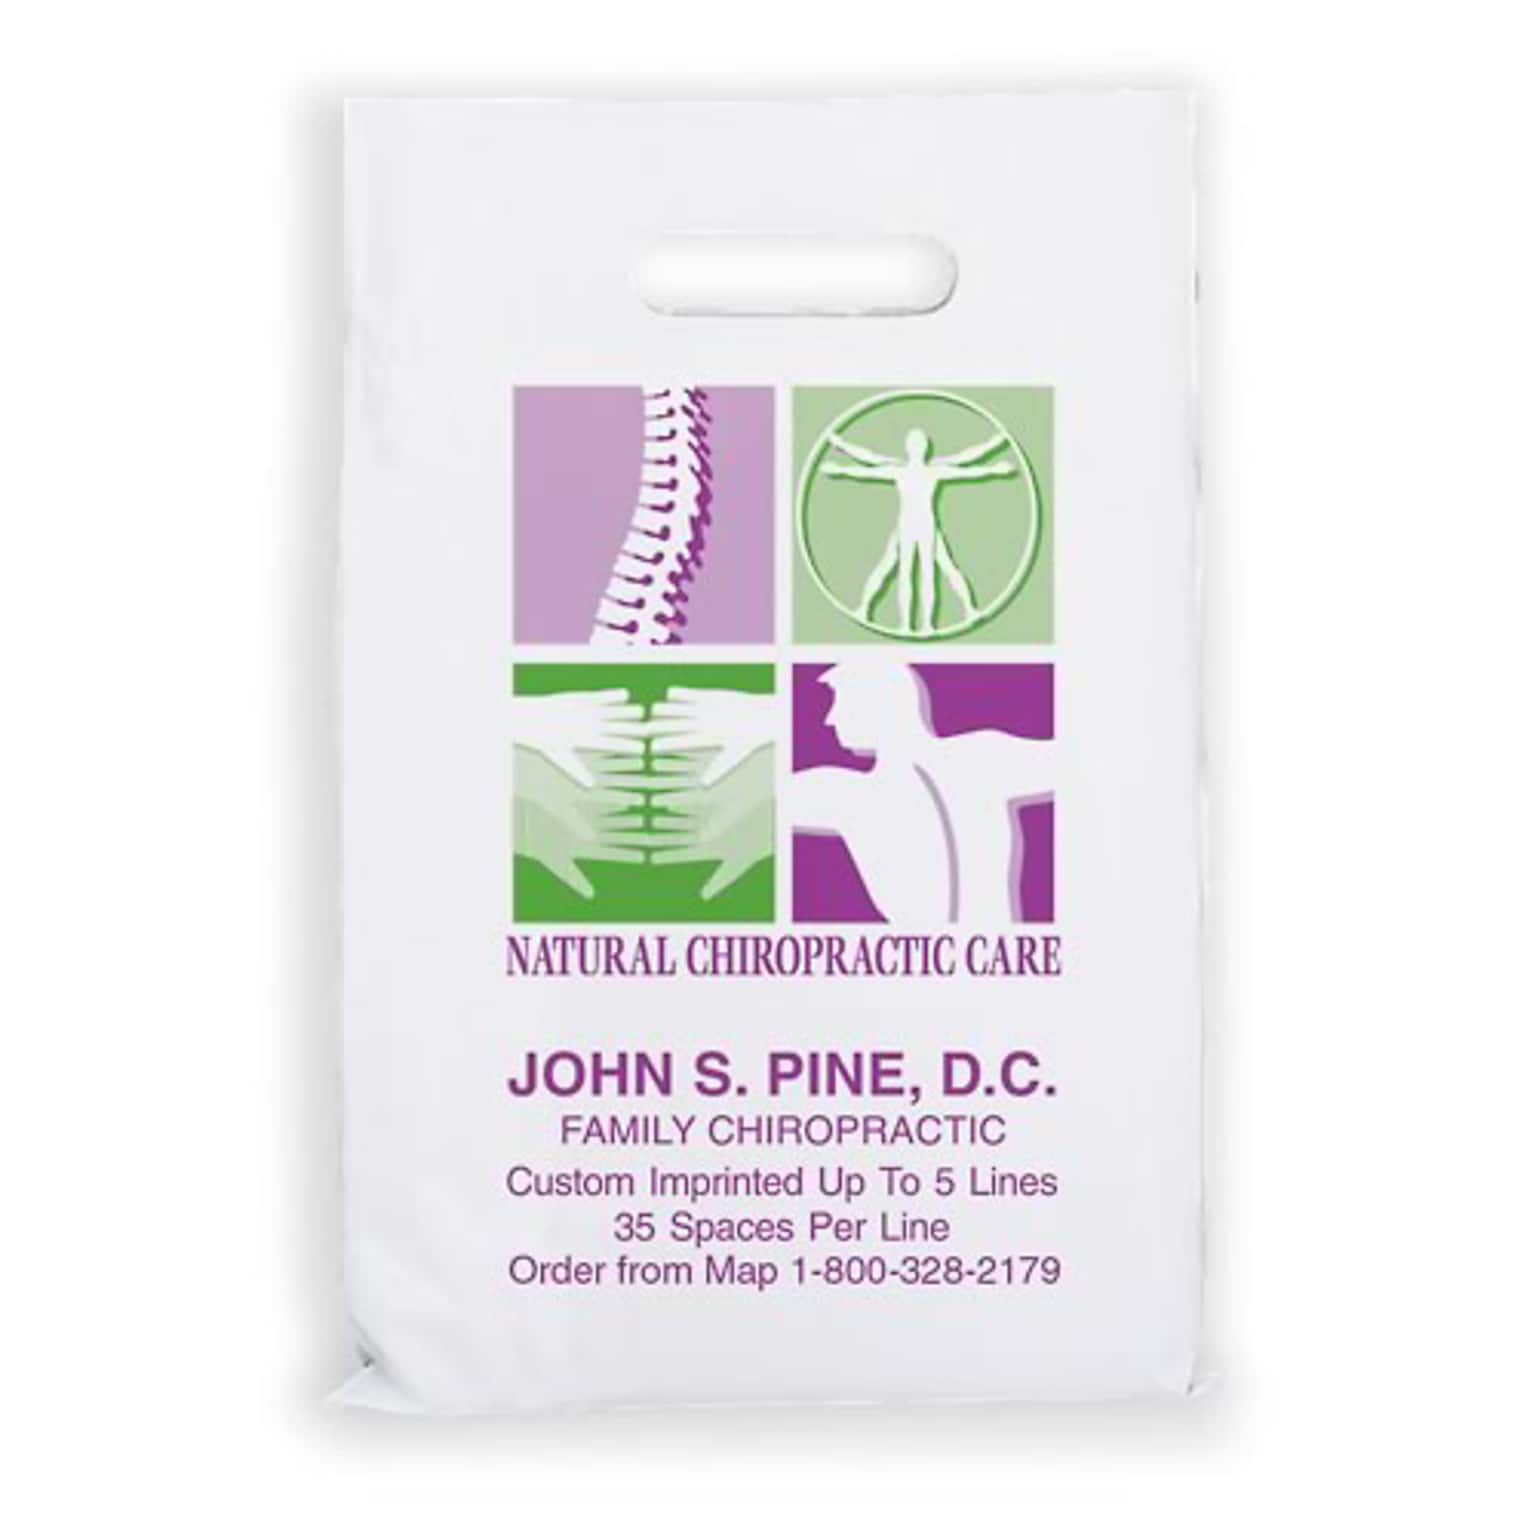 Medical Arts Press® Chiropractic Personalized Large 2-Color Supply Bags; 9x13, Natural Chiropractic Care, 100 Bags, (653731)